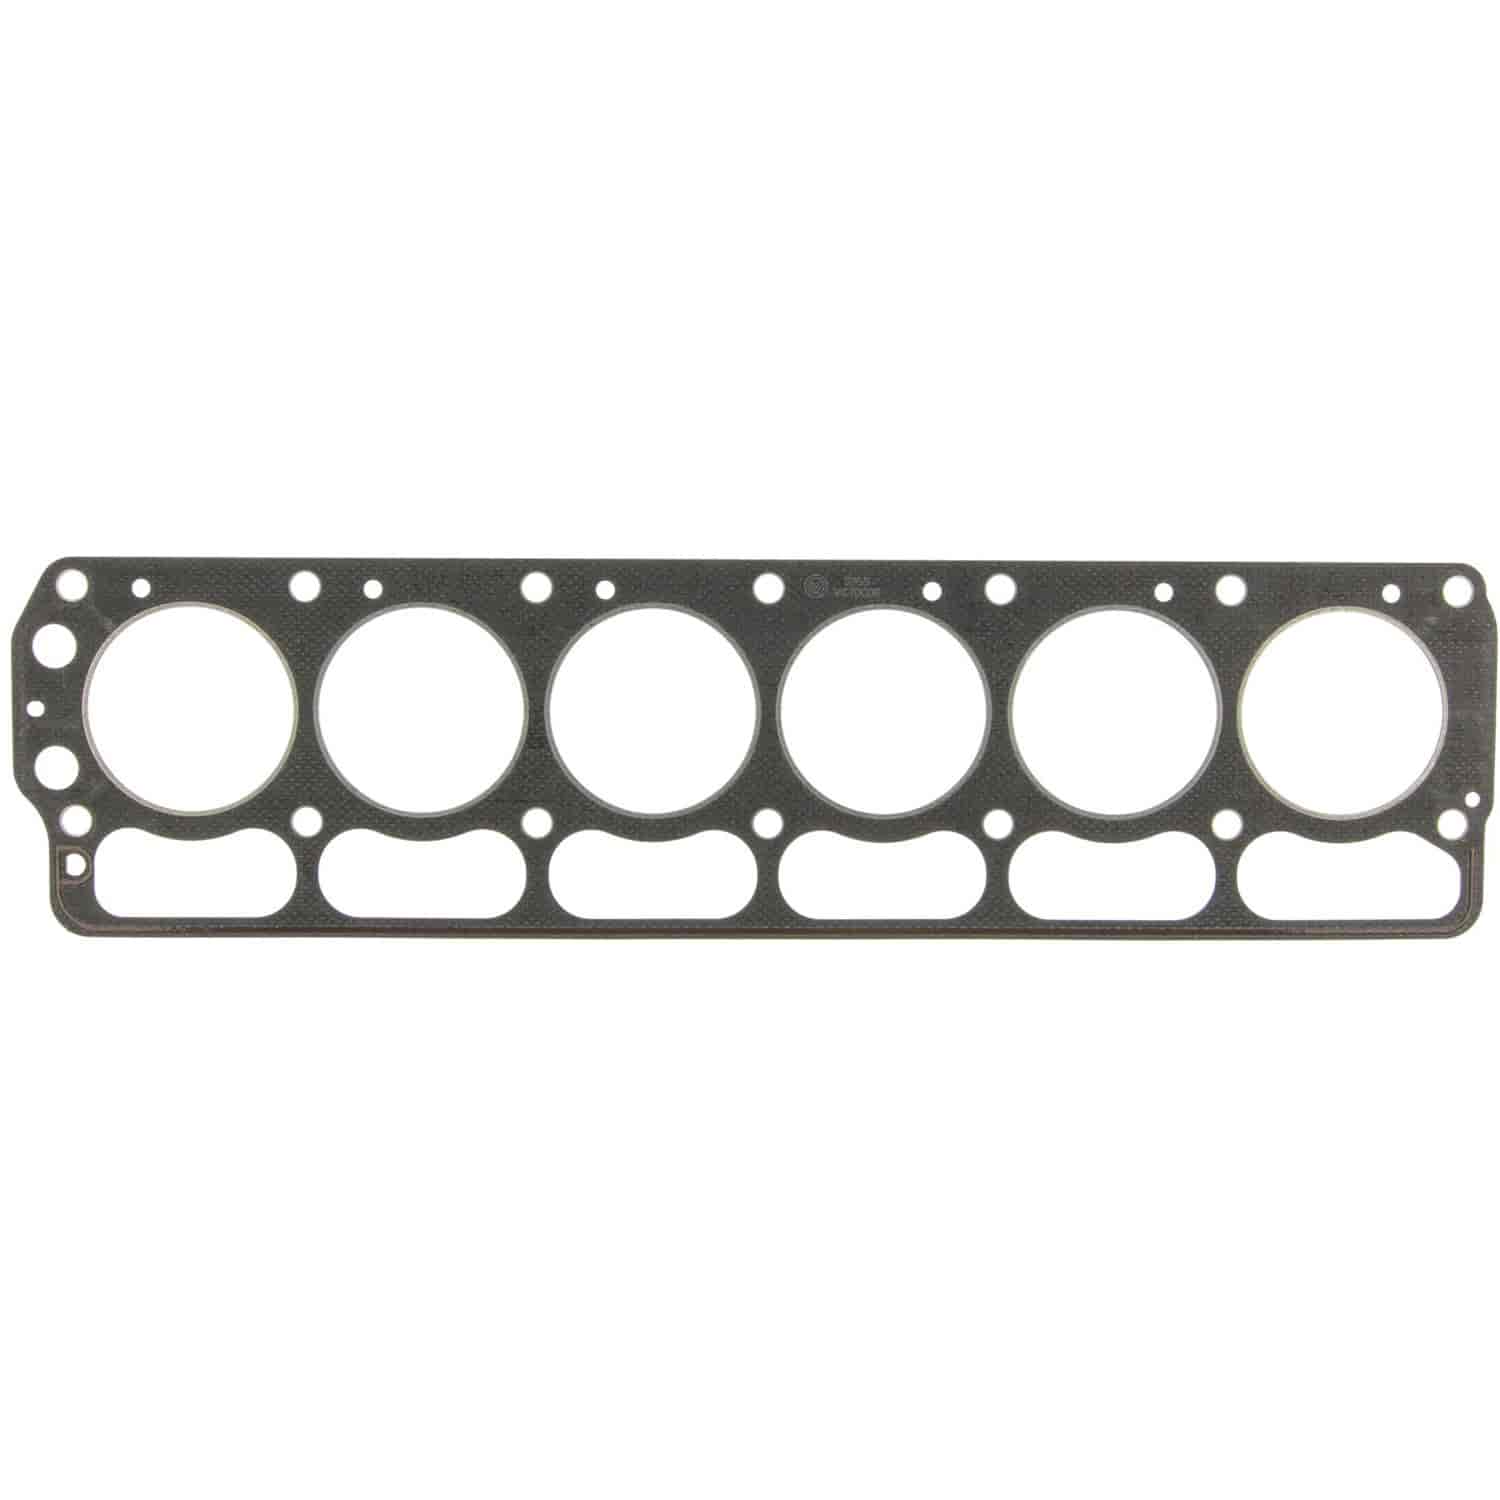 Cylinder Head Gasket Chry-Pass&Ind  Dod-Pass&Trk  Ply-Pass&Trk  MF 170 H170 198 225 H225 60-87